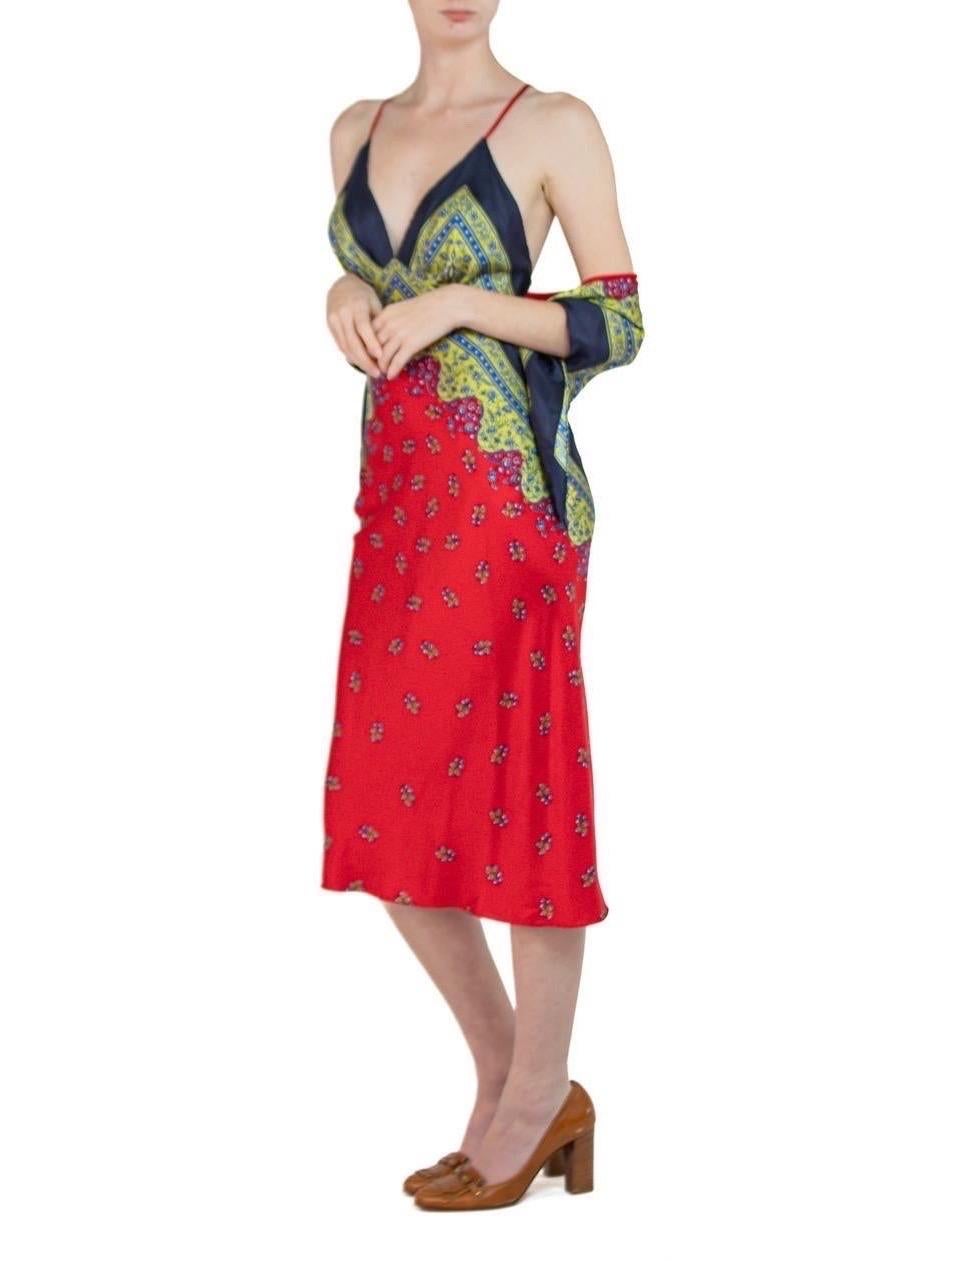 MORPHEW COLLECTION Navy Blue, Lime Green & Red Silk Twill Floral Ditsy Print Sc For Sale 1